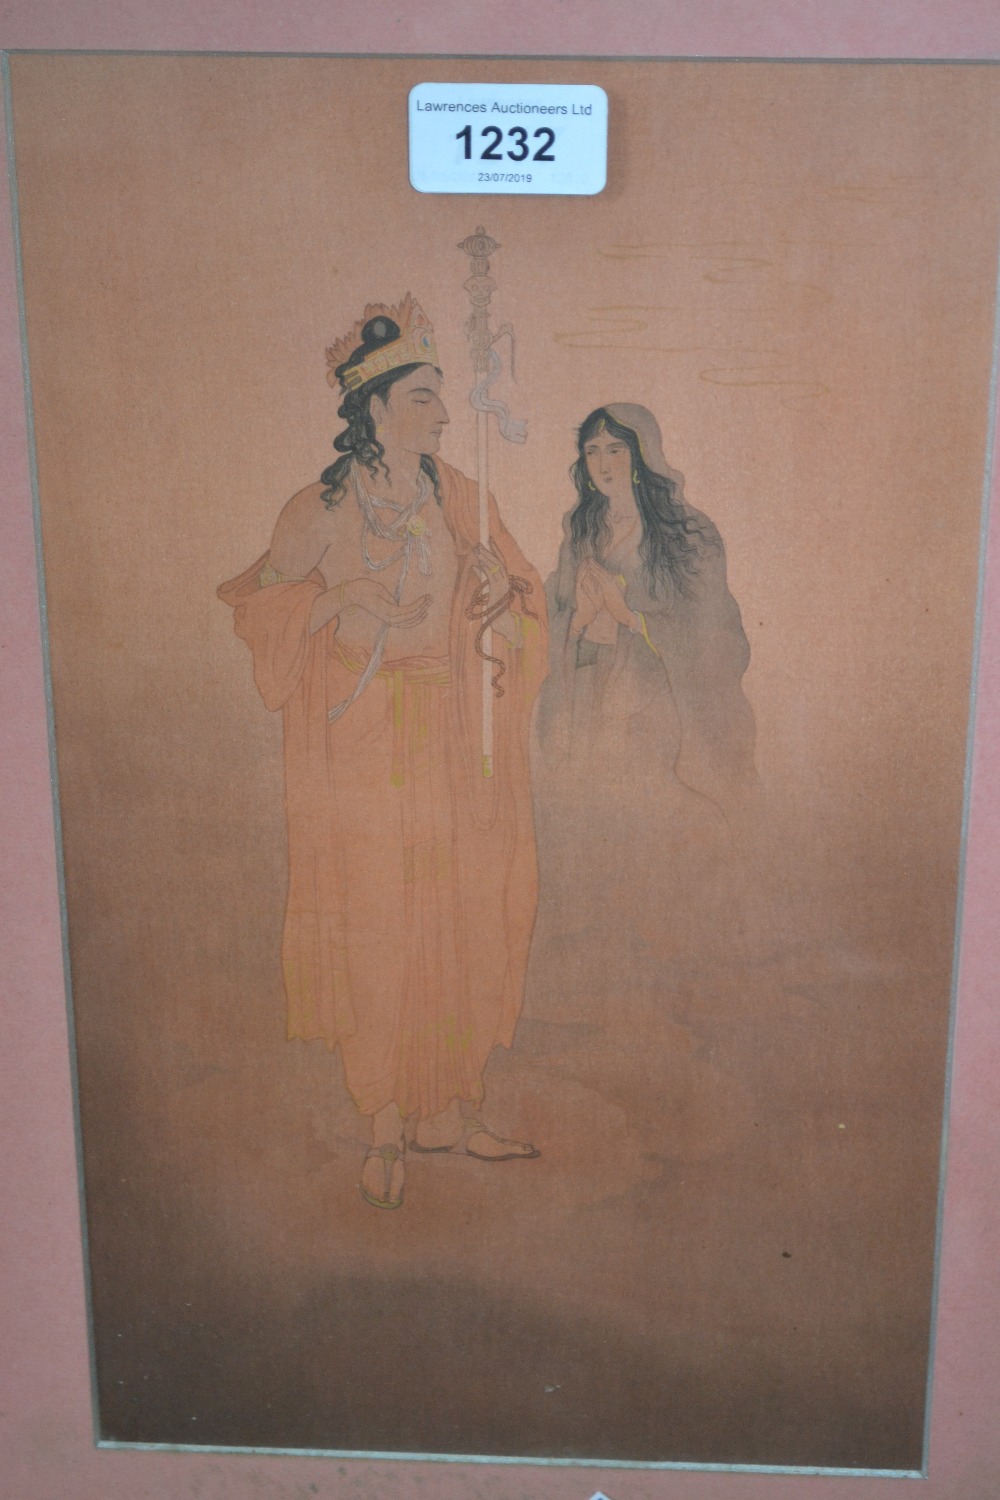 Set of three Asian overpainted prints of various figures/ deities, two unsigned, one bearing